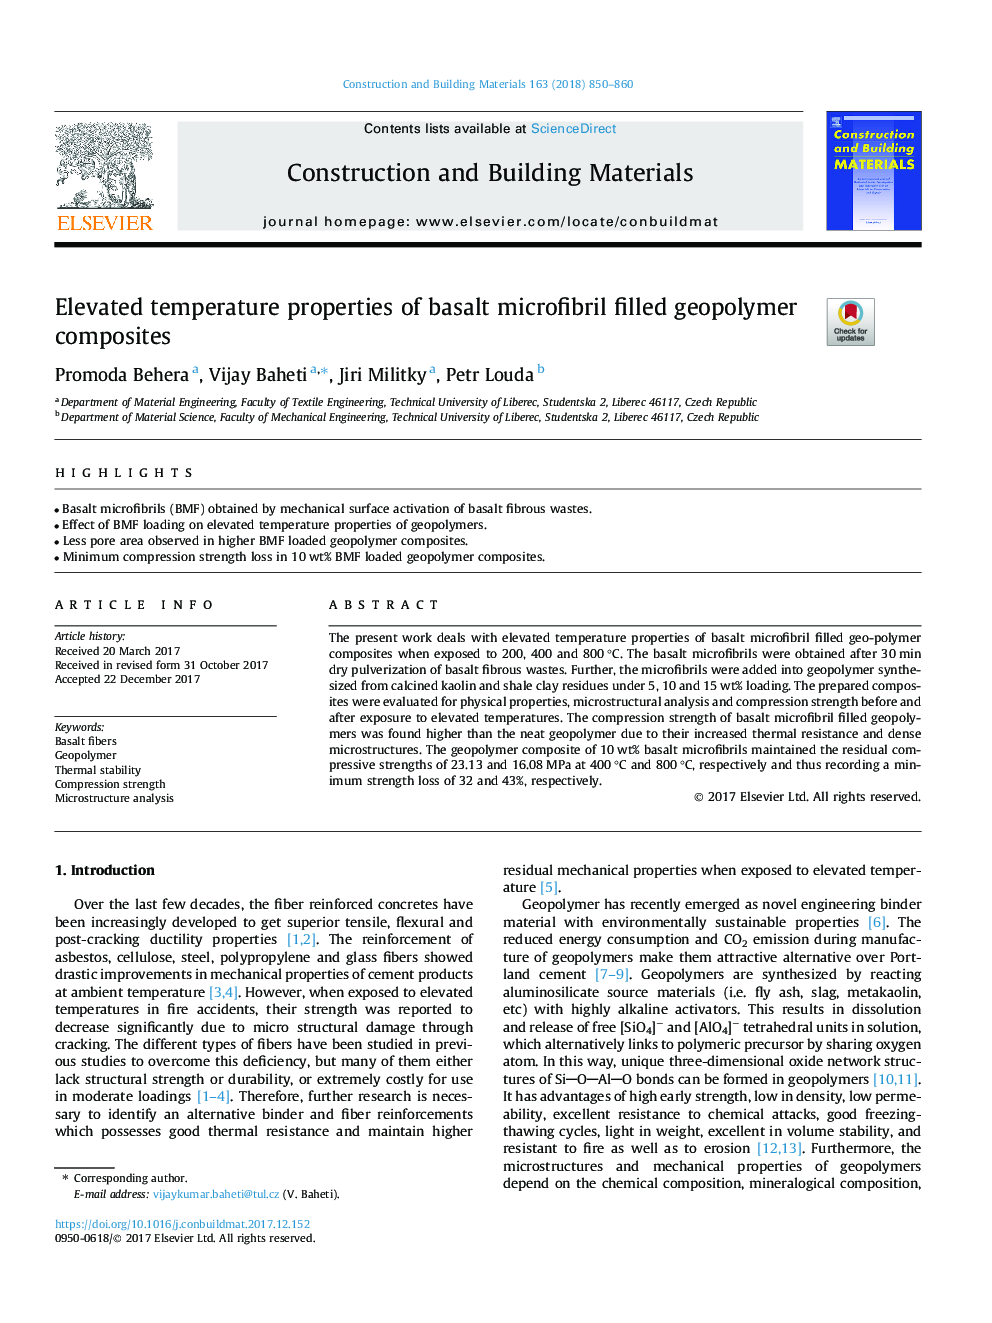 Elevated temperature properties of basalt microfibril filled geopolymer composites